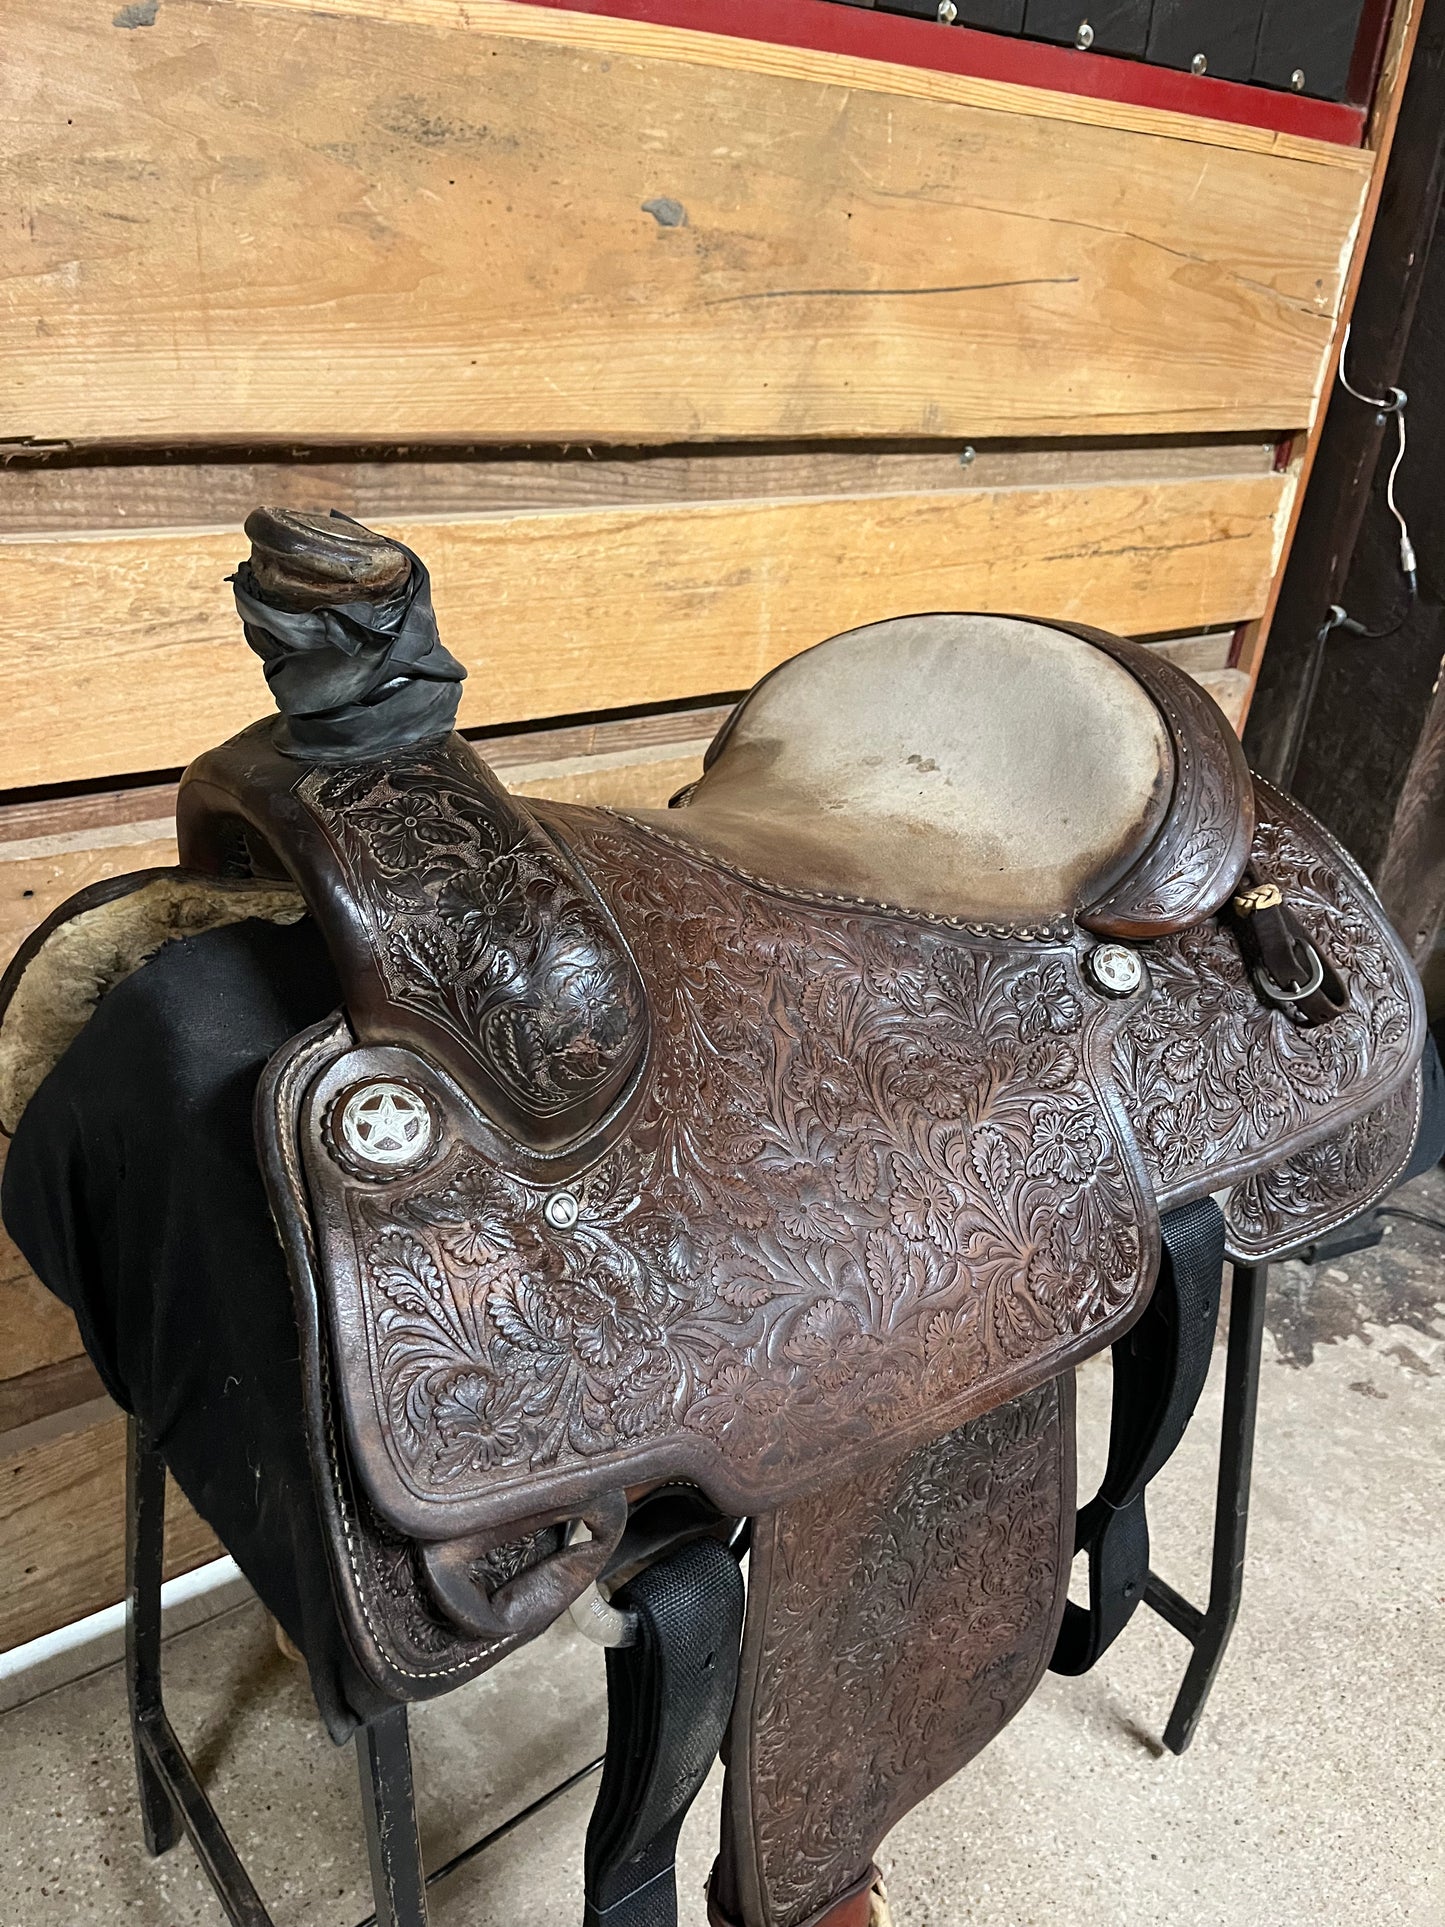 Billy Cook Roper ISUSED820